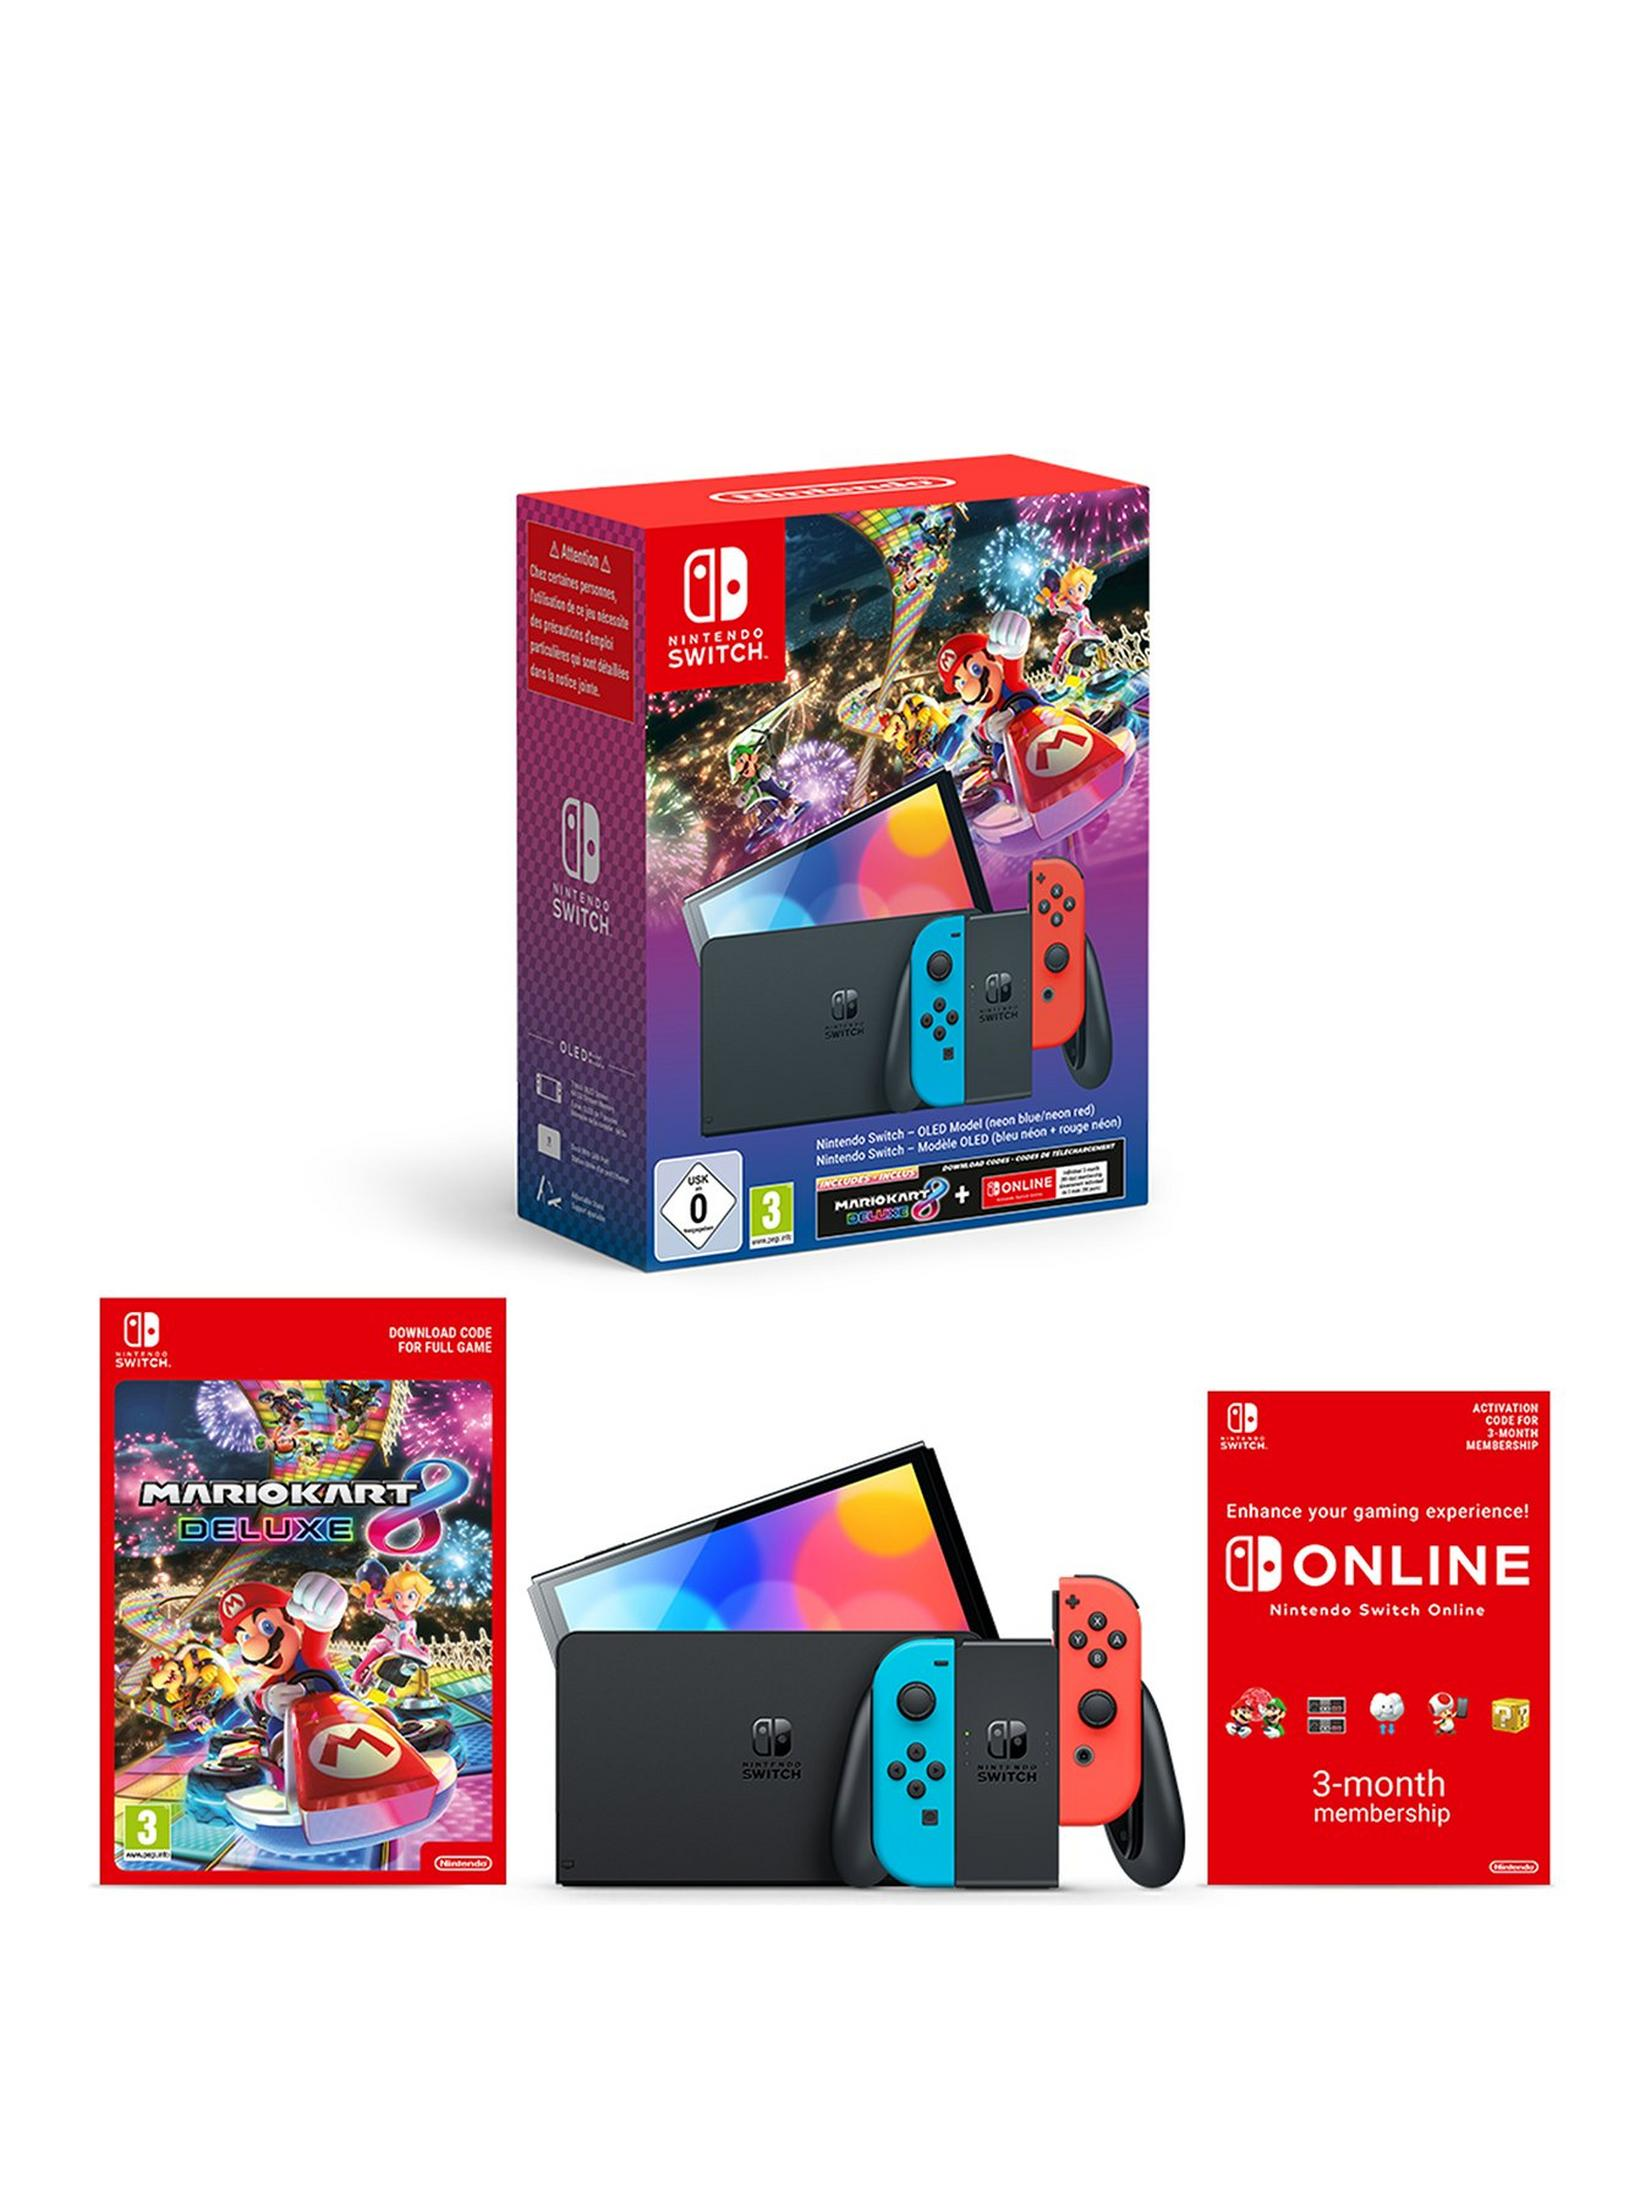 This Nintendo Switch OLED bundle is one of the best Black Friday